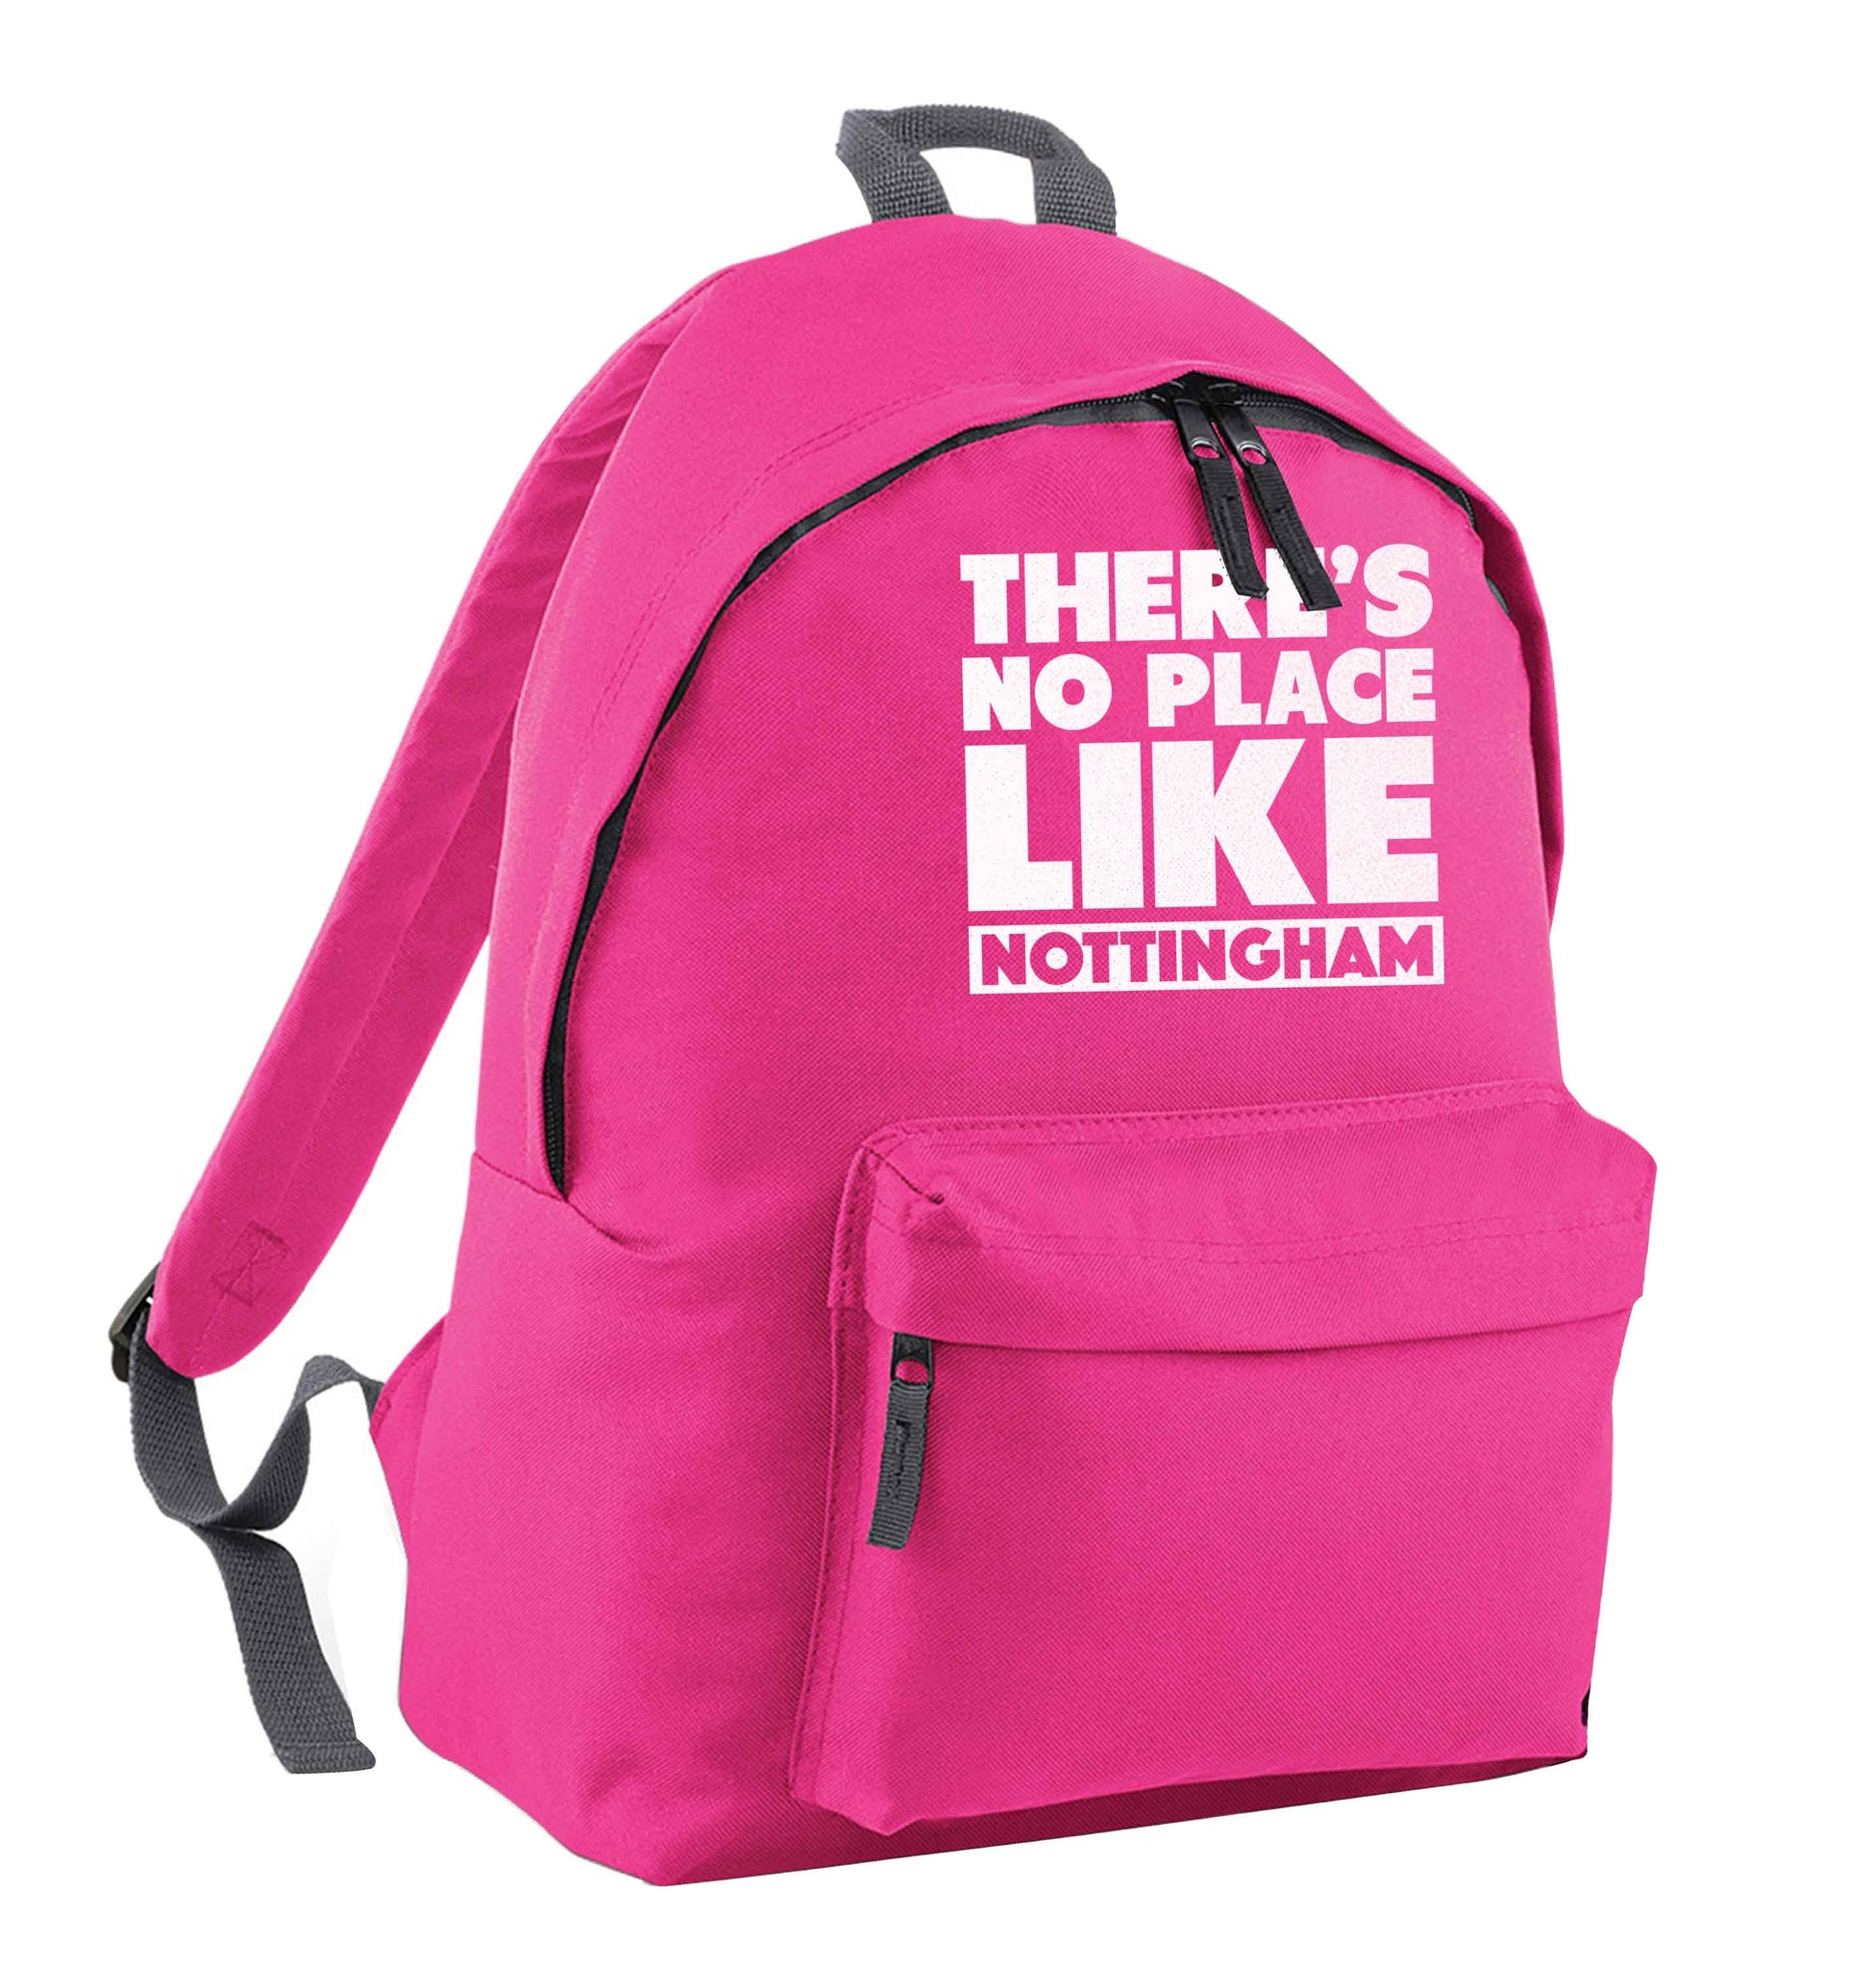 There's no place like Nottingham pink adults backpack